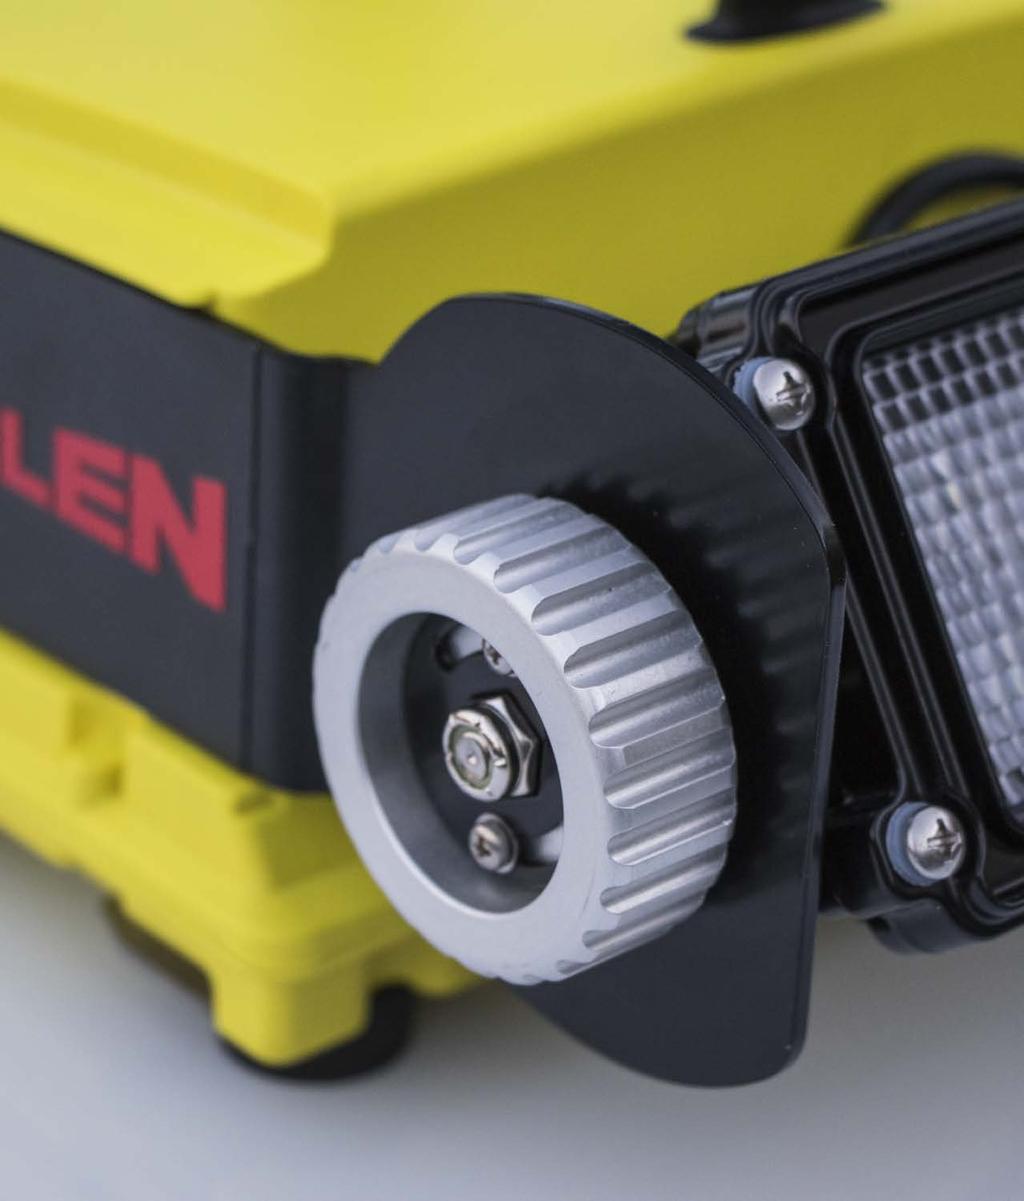 Optics Whelen s renowned Pioneer optics are trusted throughout the emergency warning industry.